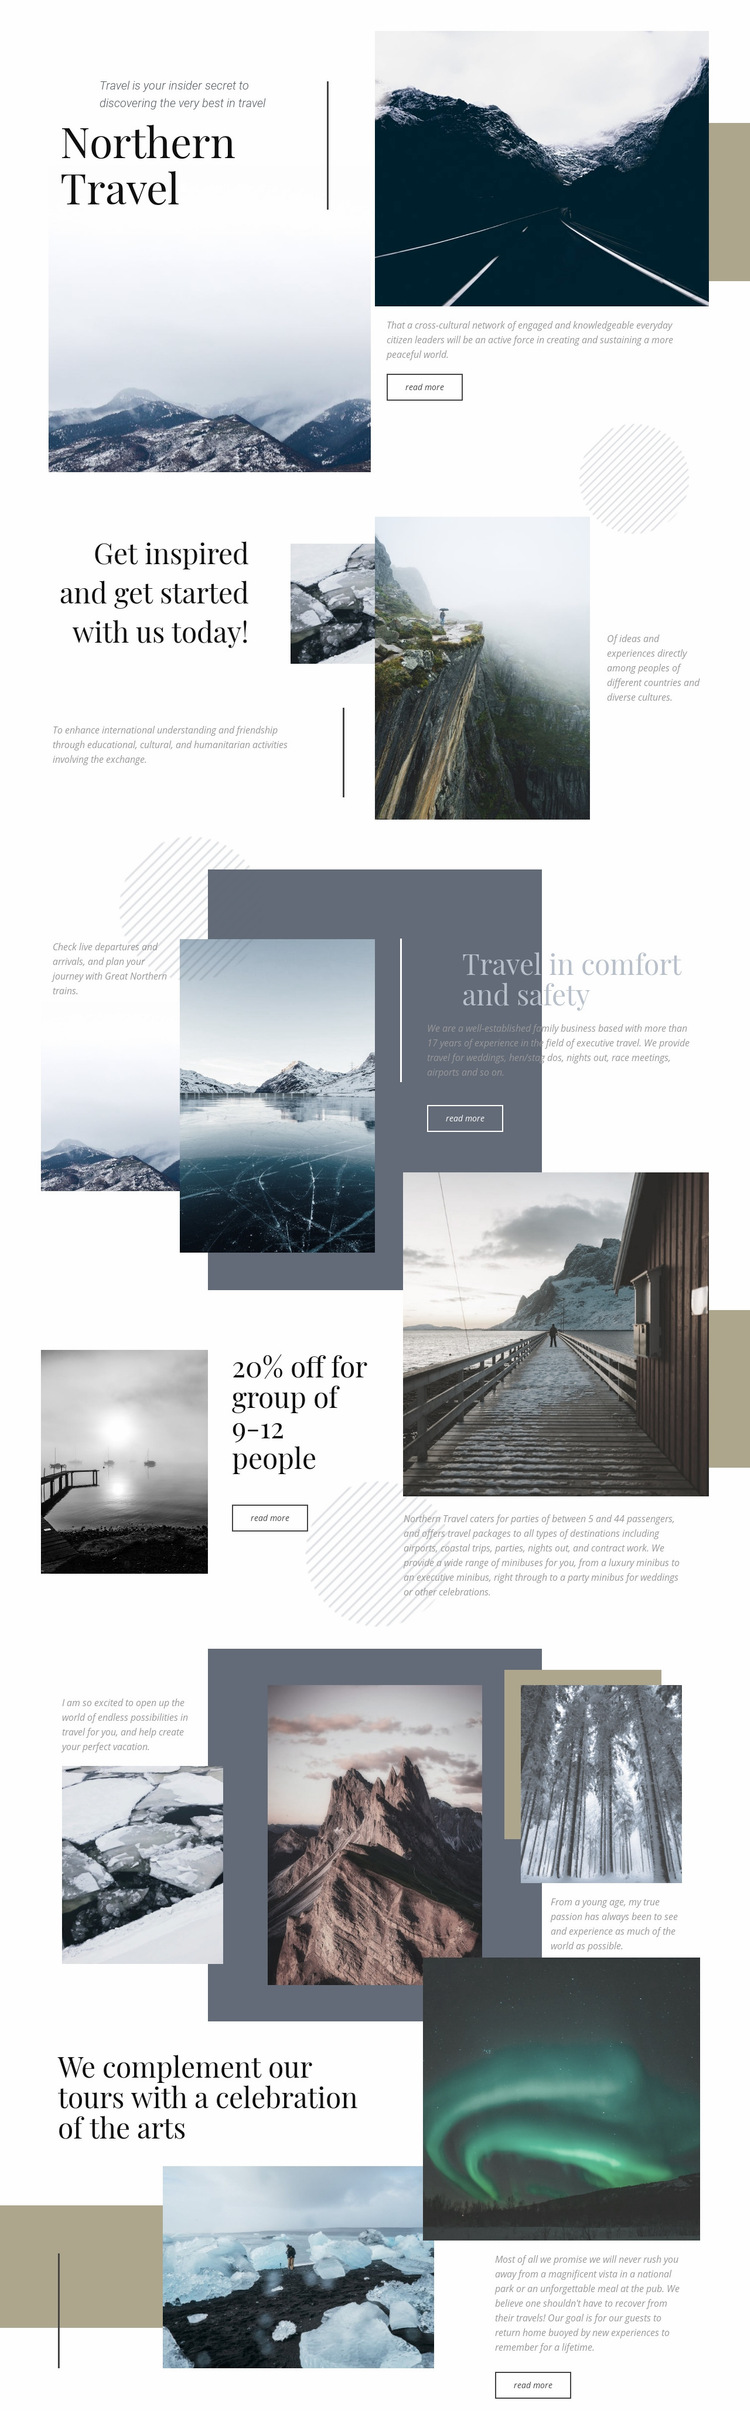 Northern Travel Web Page Design